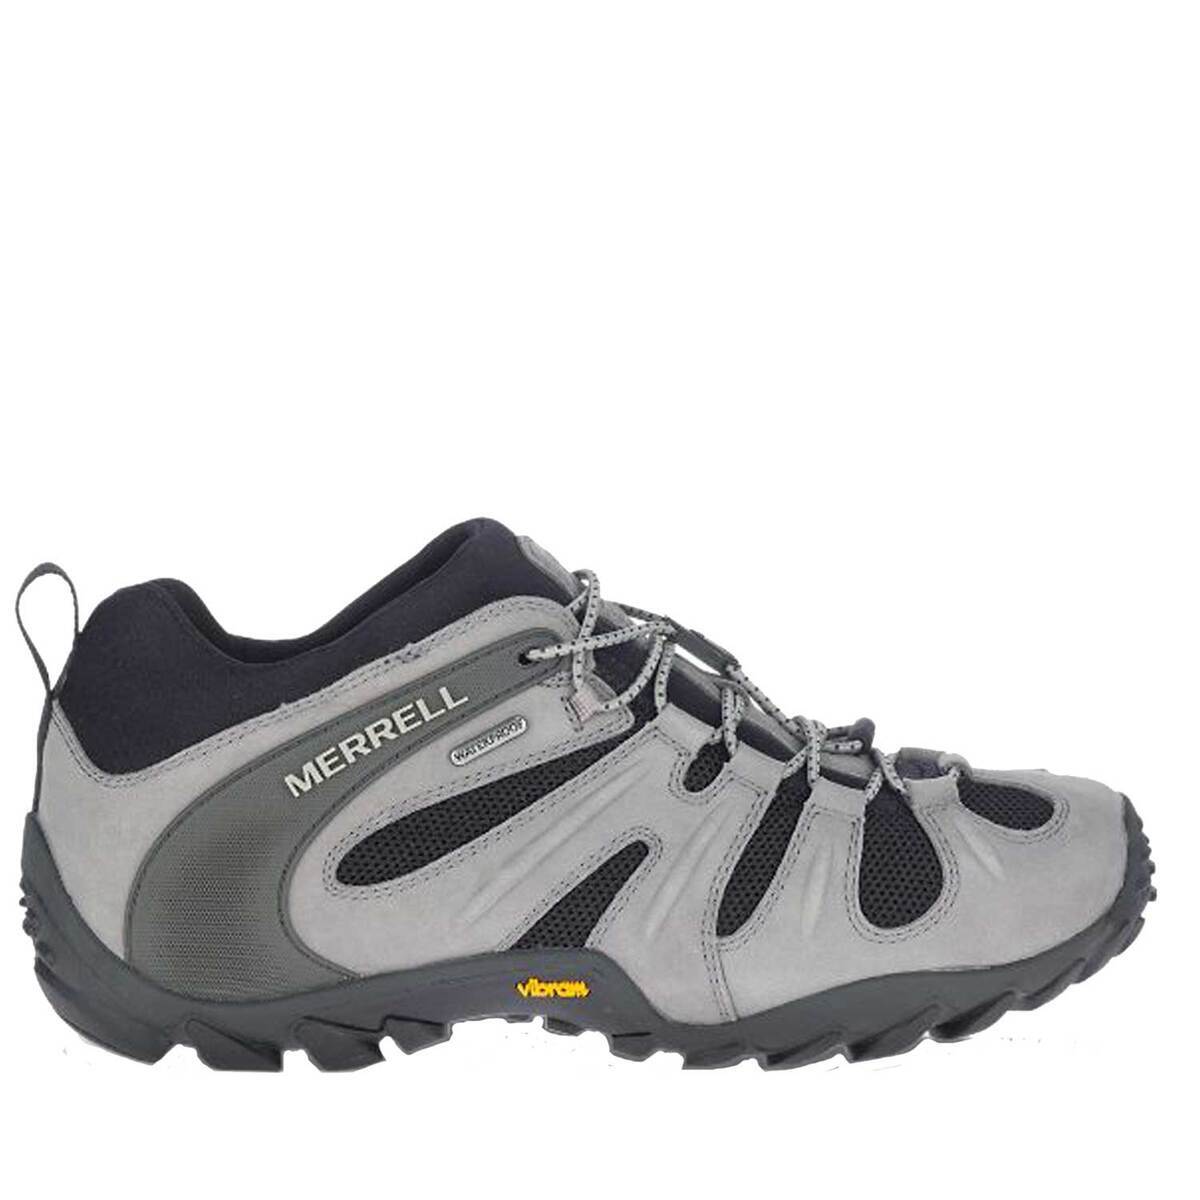 Chameleon 8 Stretch Waterproof Low Hiking Shoes | Sportsman's Warehouse